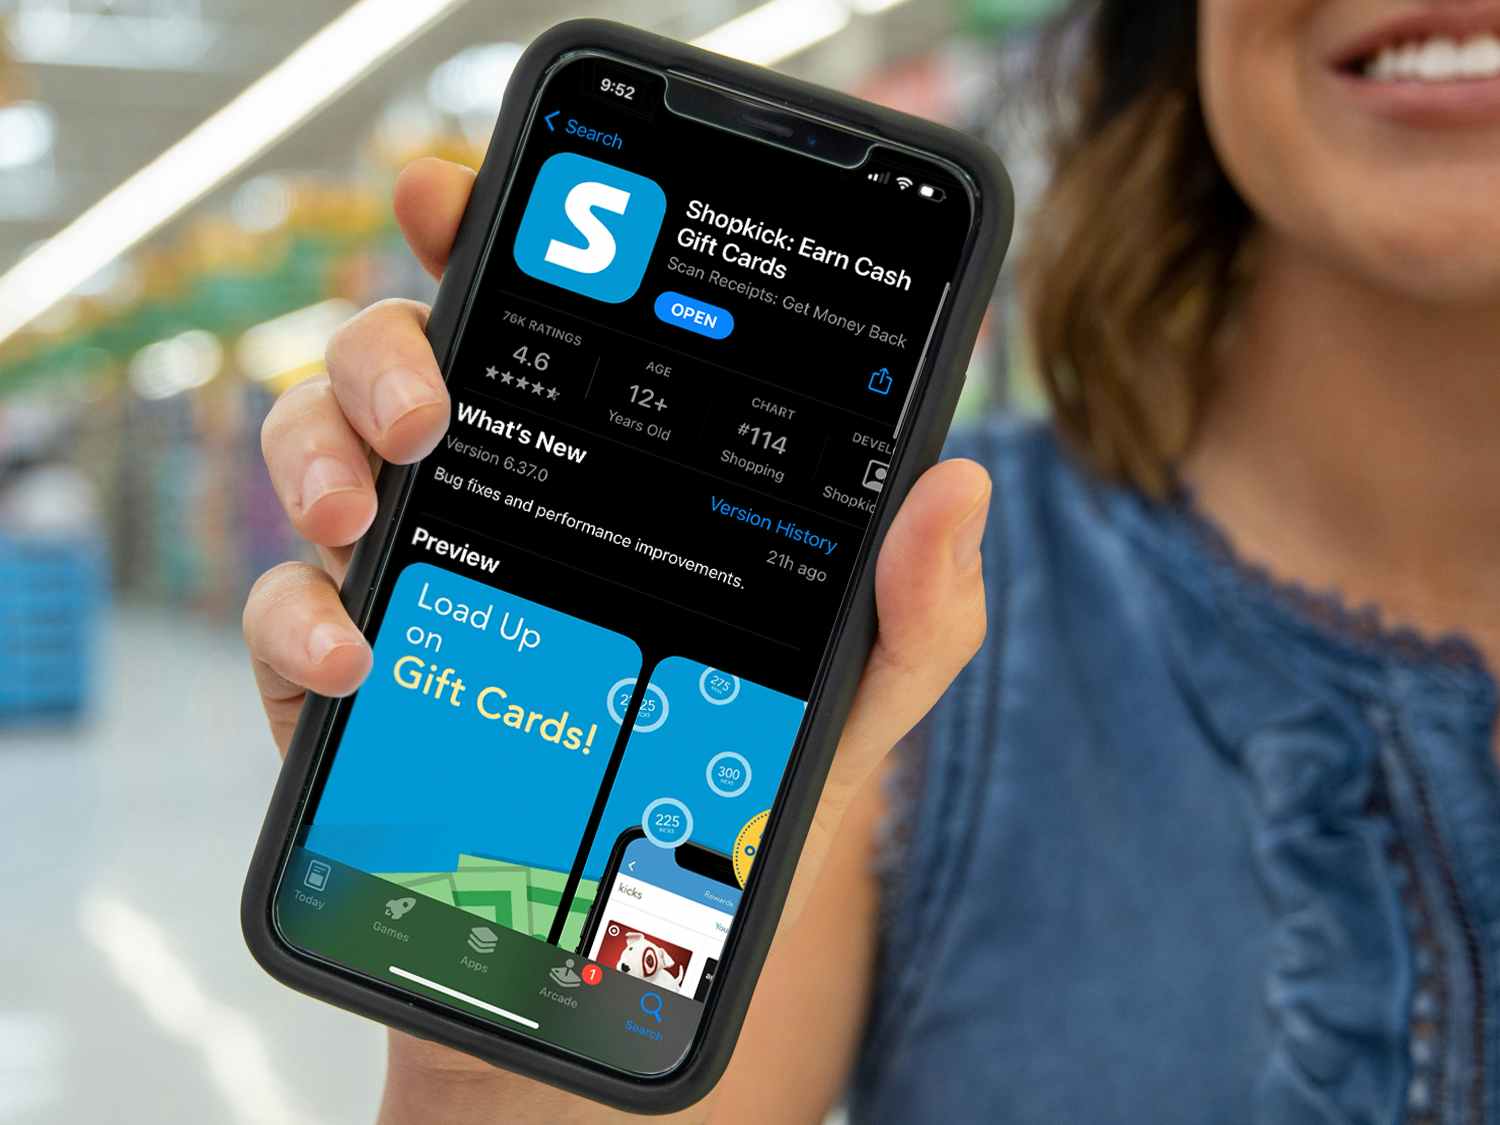 A person holding their phone up in a store, showing the app store download screen for Shopkick